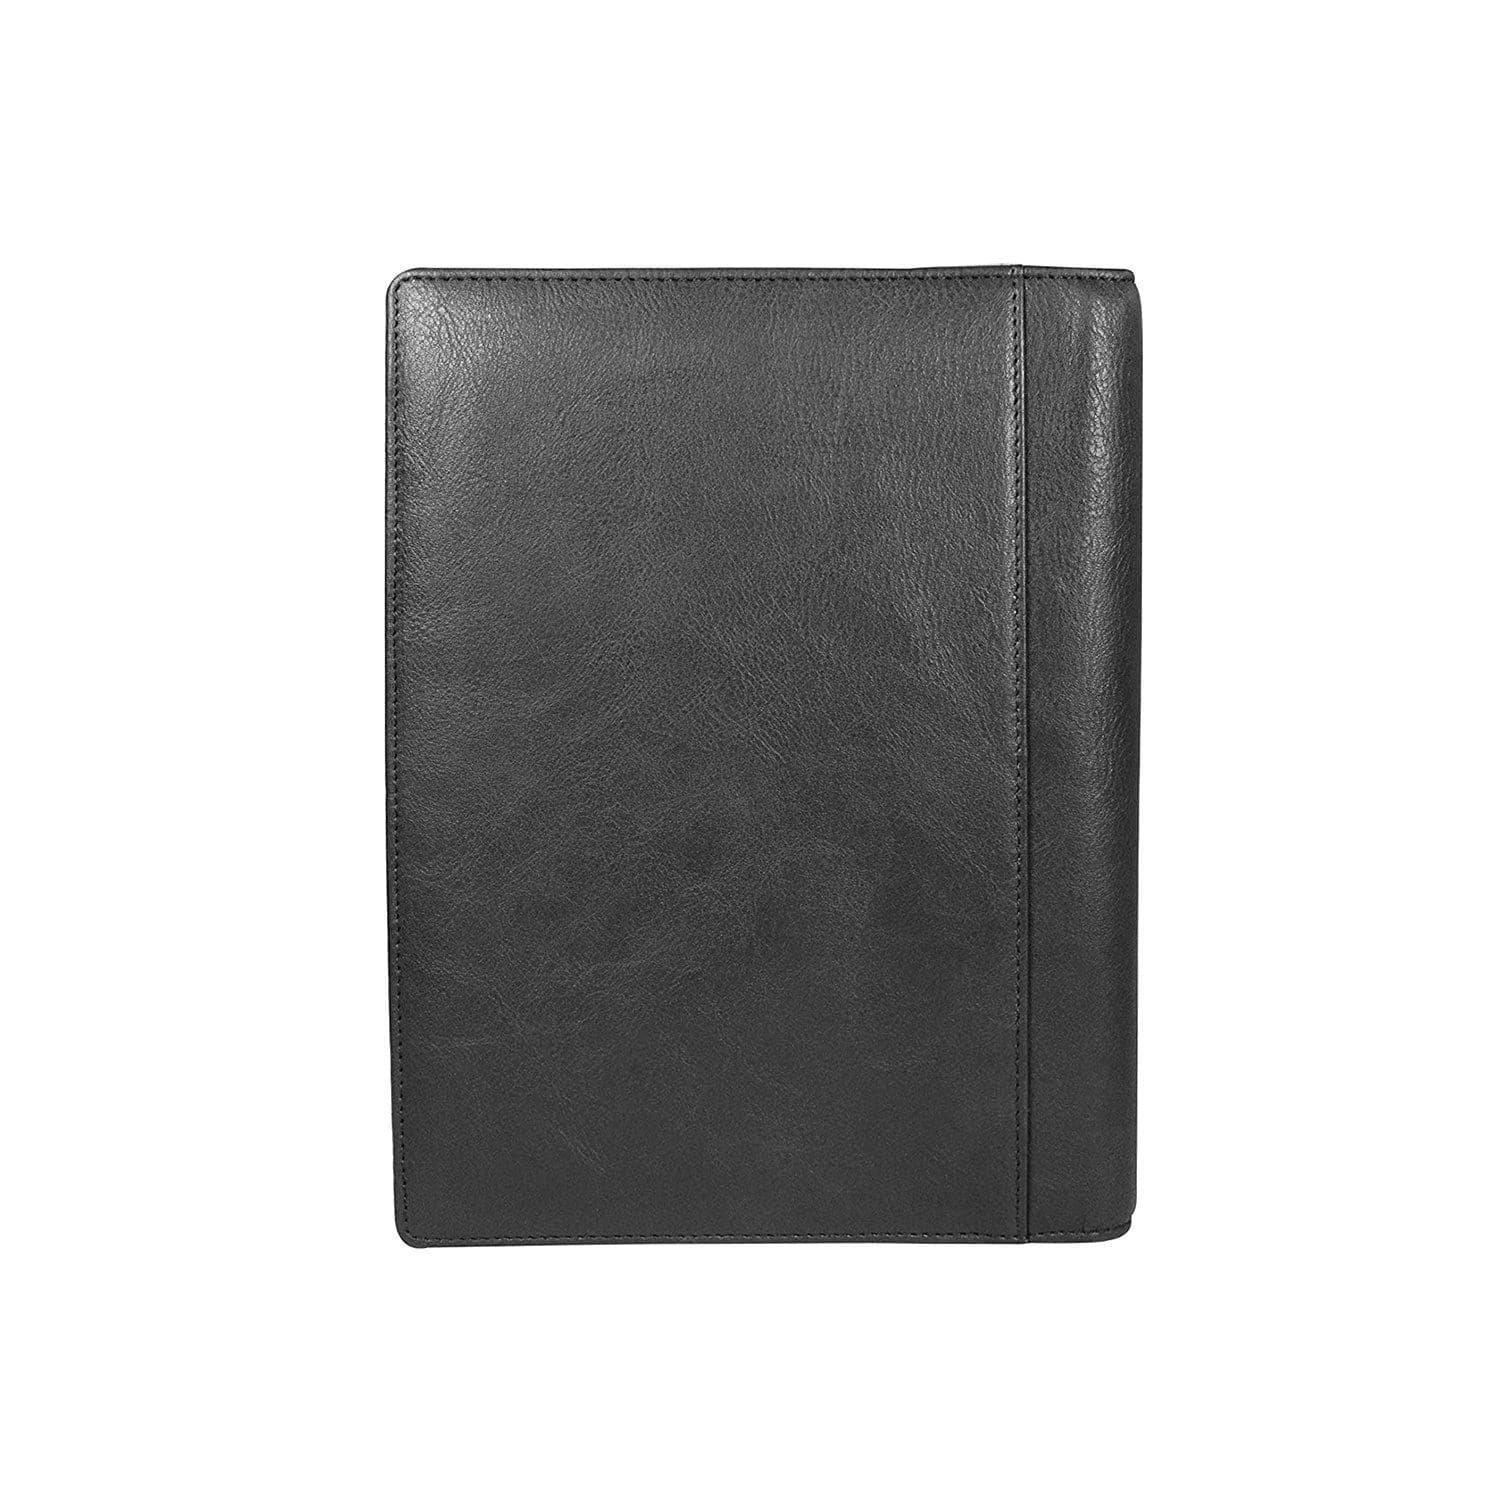 Cross Insignia Express A5 Size Leather Planner with Cross Agenda Pen  - Black - AC1268329-2-1 - Jashanmal Home